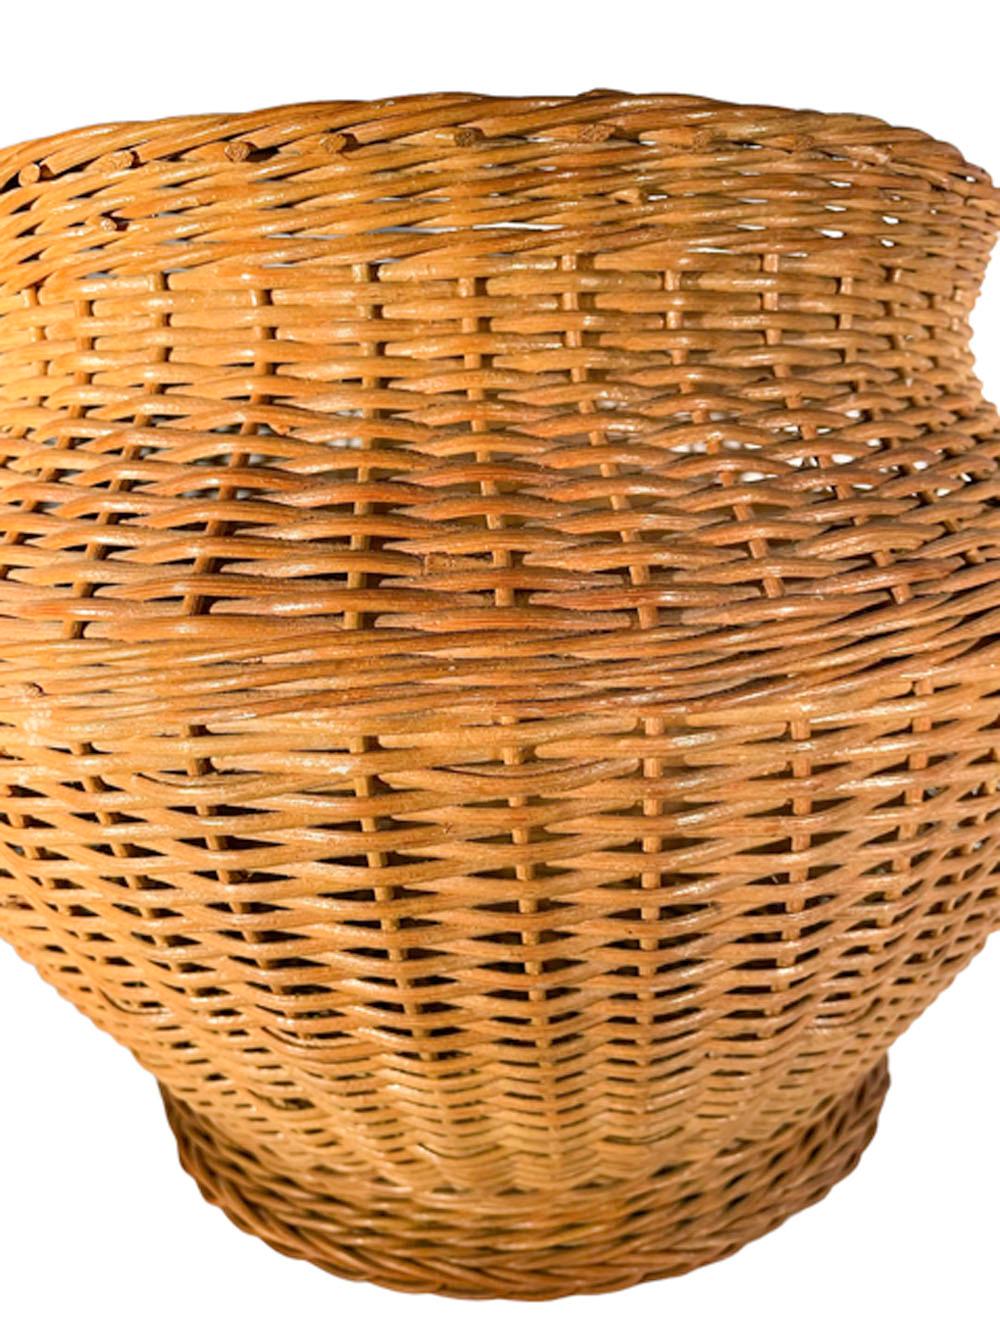 Large Art Deco Wicker Handled Cachepot Retaining Its Haywood-Wakefield Label For Sale 3